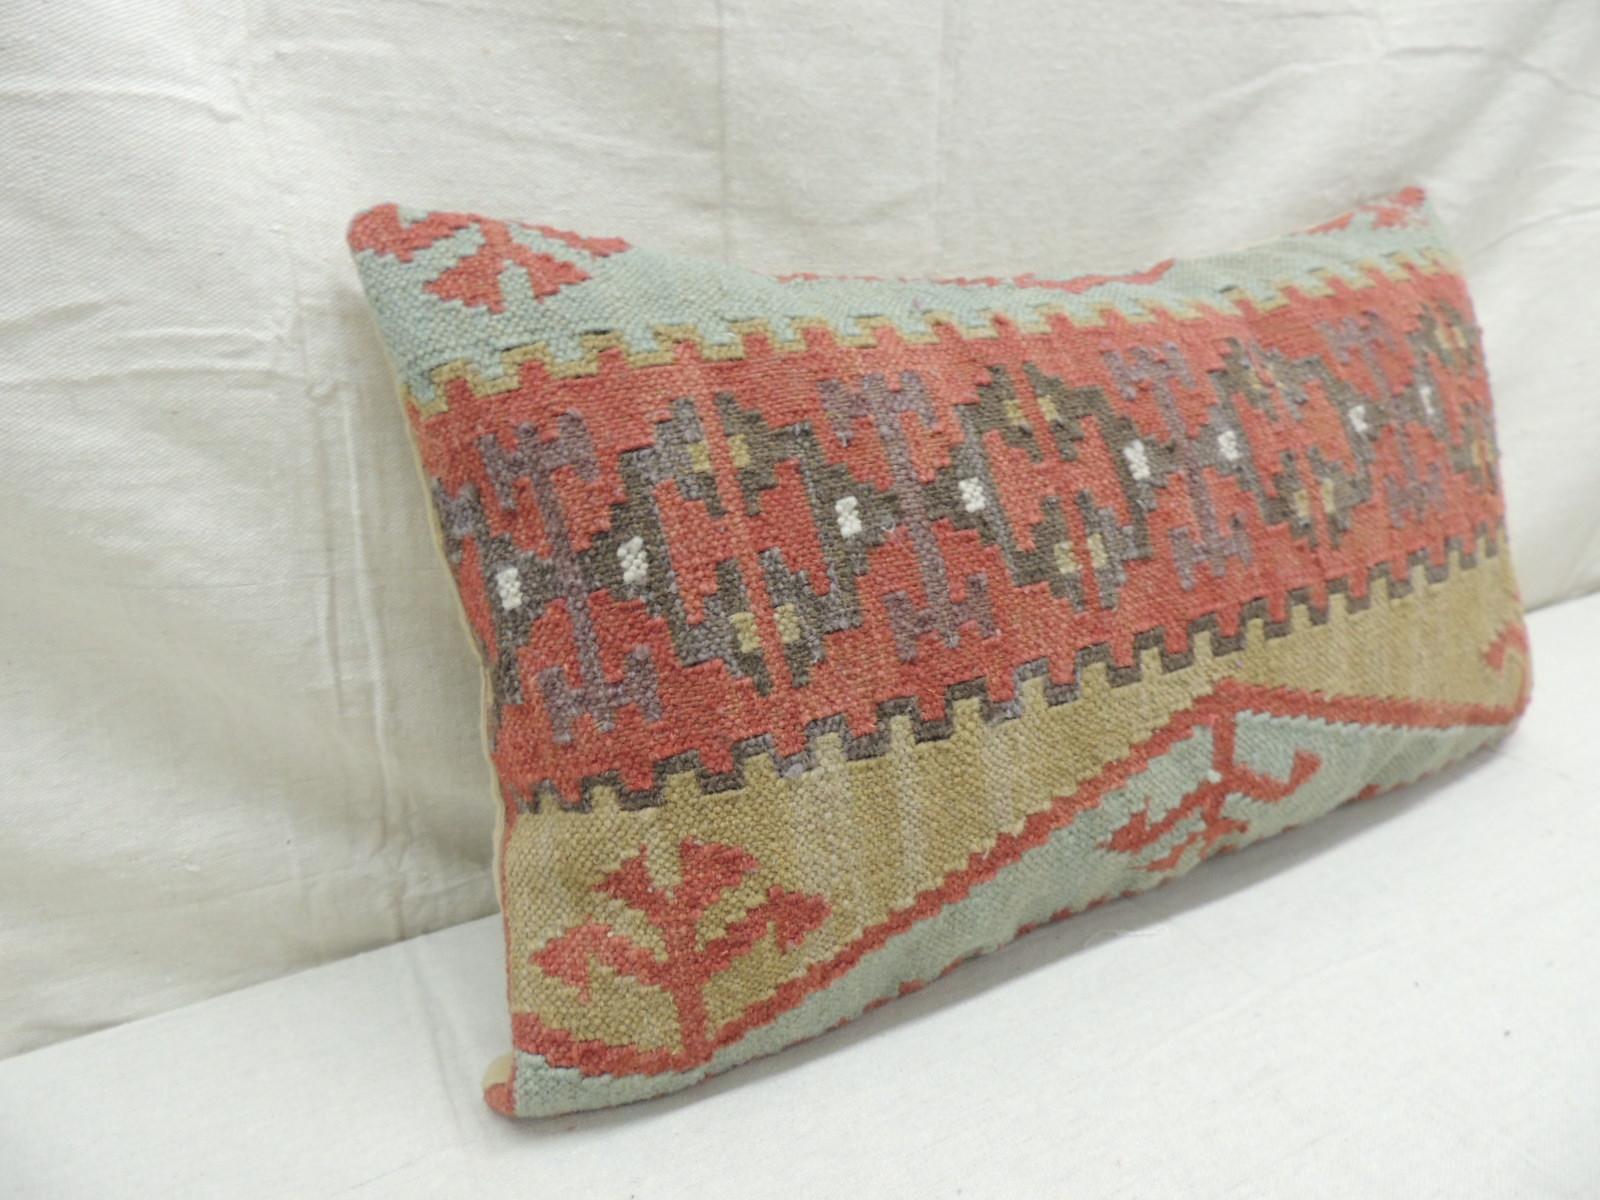 Rust and blue woven Kilim decorative bolster pillow
khaki color cotton backing.
Decorative pillow handcrafted and designed in the USA 
 Zipper closure with custom made pillow insert.
Size: 14